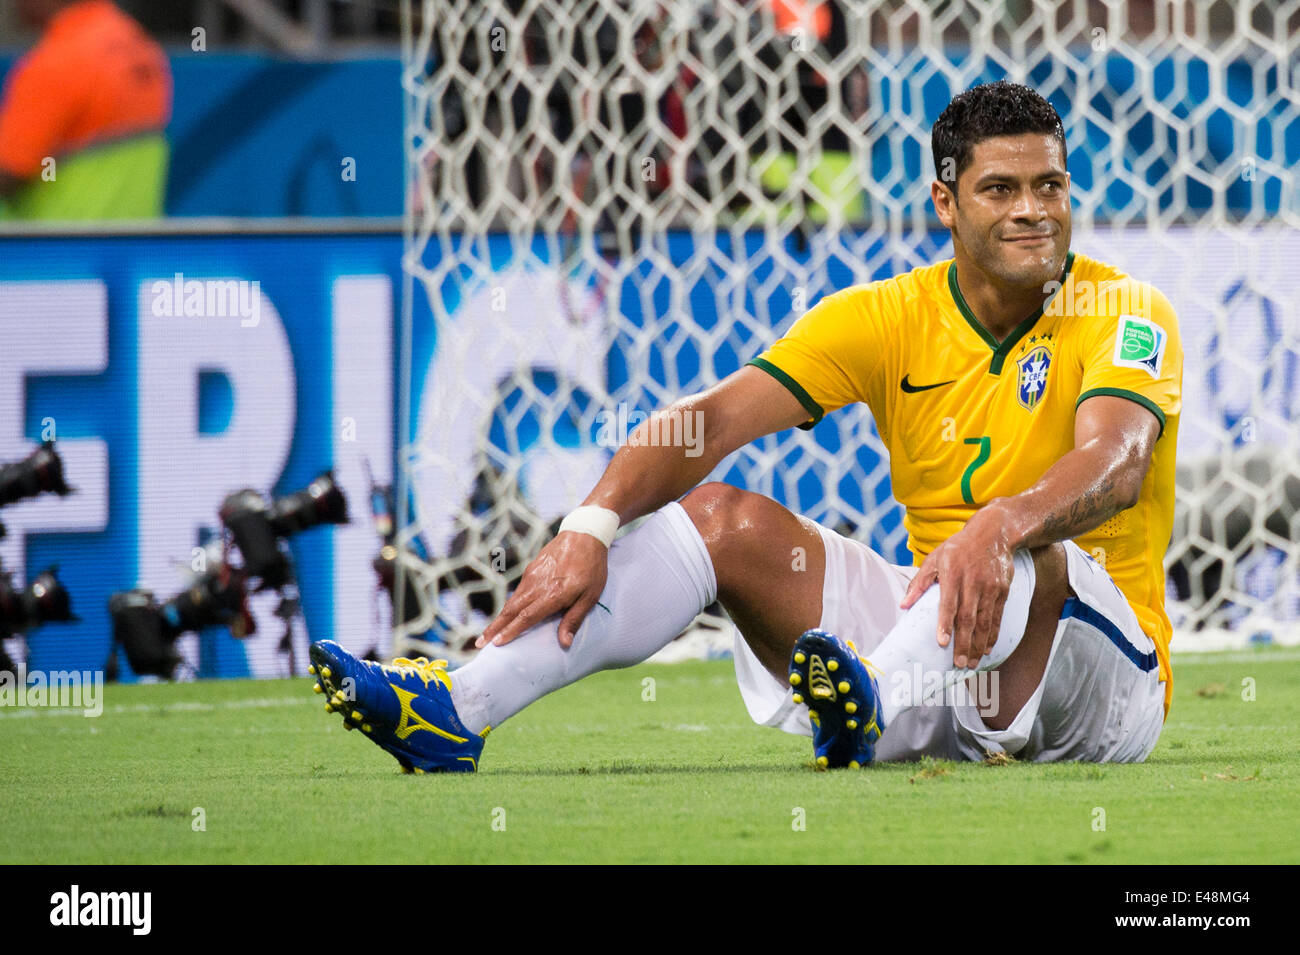 Hulk (BRA), JULY 4, 2014 - Football / Soccer : Hulk of Brazil looks dejected after missed a chance to score during the FIFA World Cup Brazil 2014 quarter-finals match between Brazil 2-1 Colombia at Estadio Castelao Stadium in Fortaleza, Brazil. (Photo by Maurizio Borsari/AFLO) Stock Photo